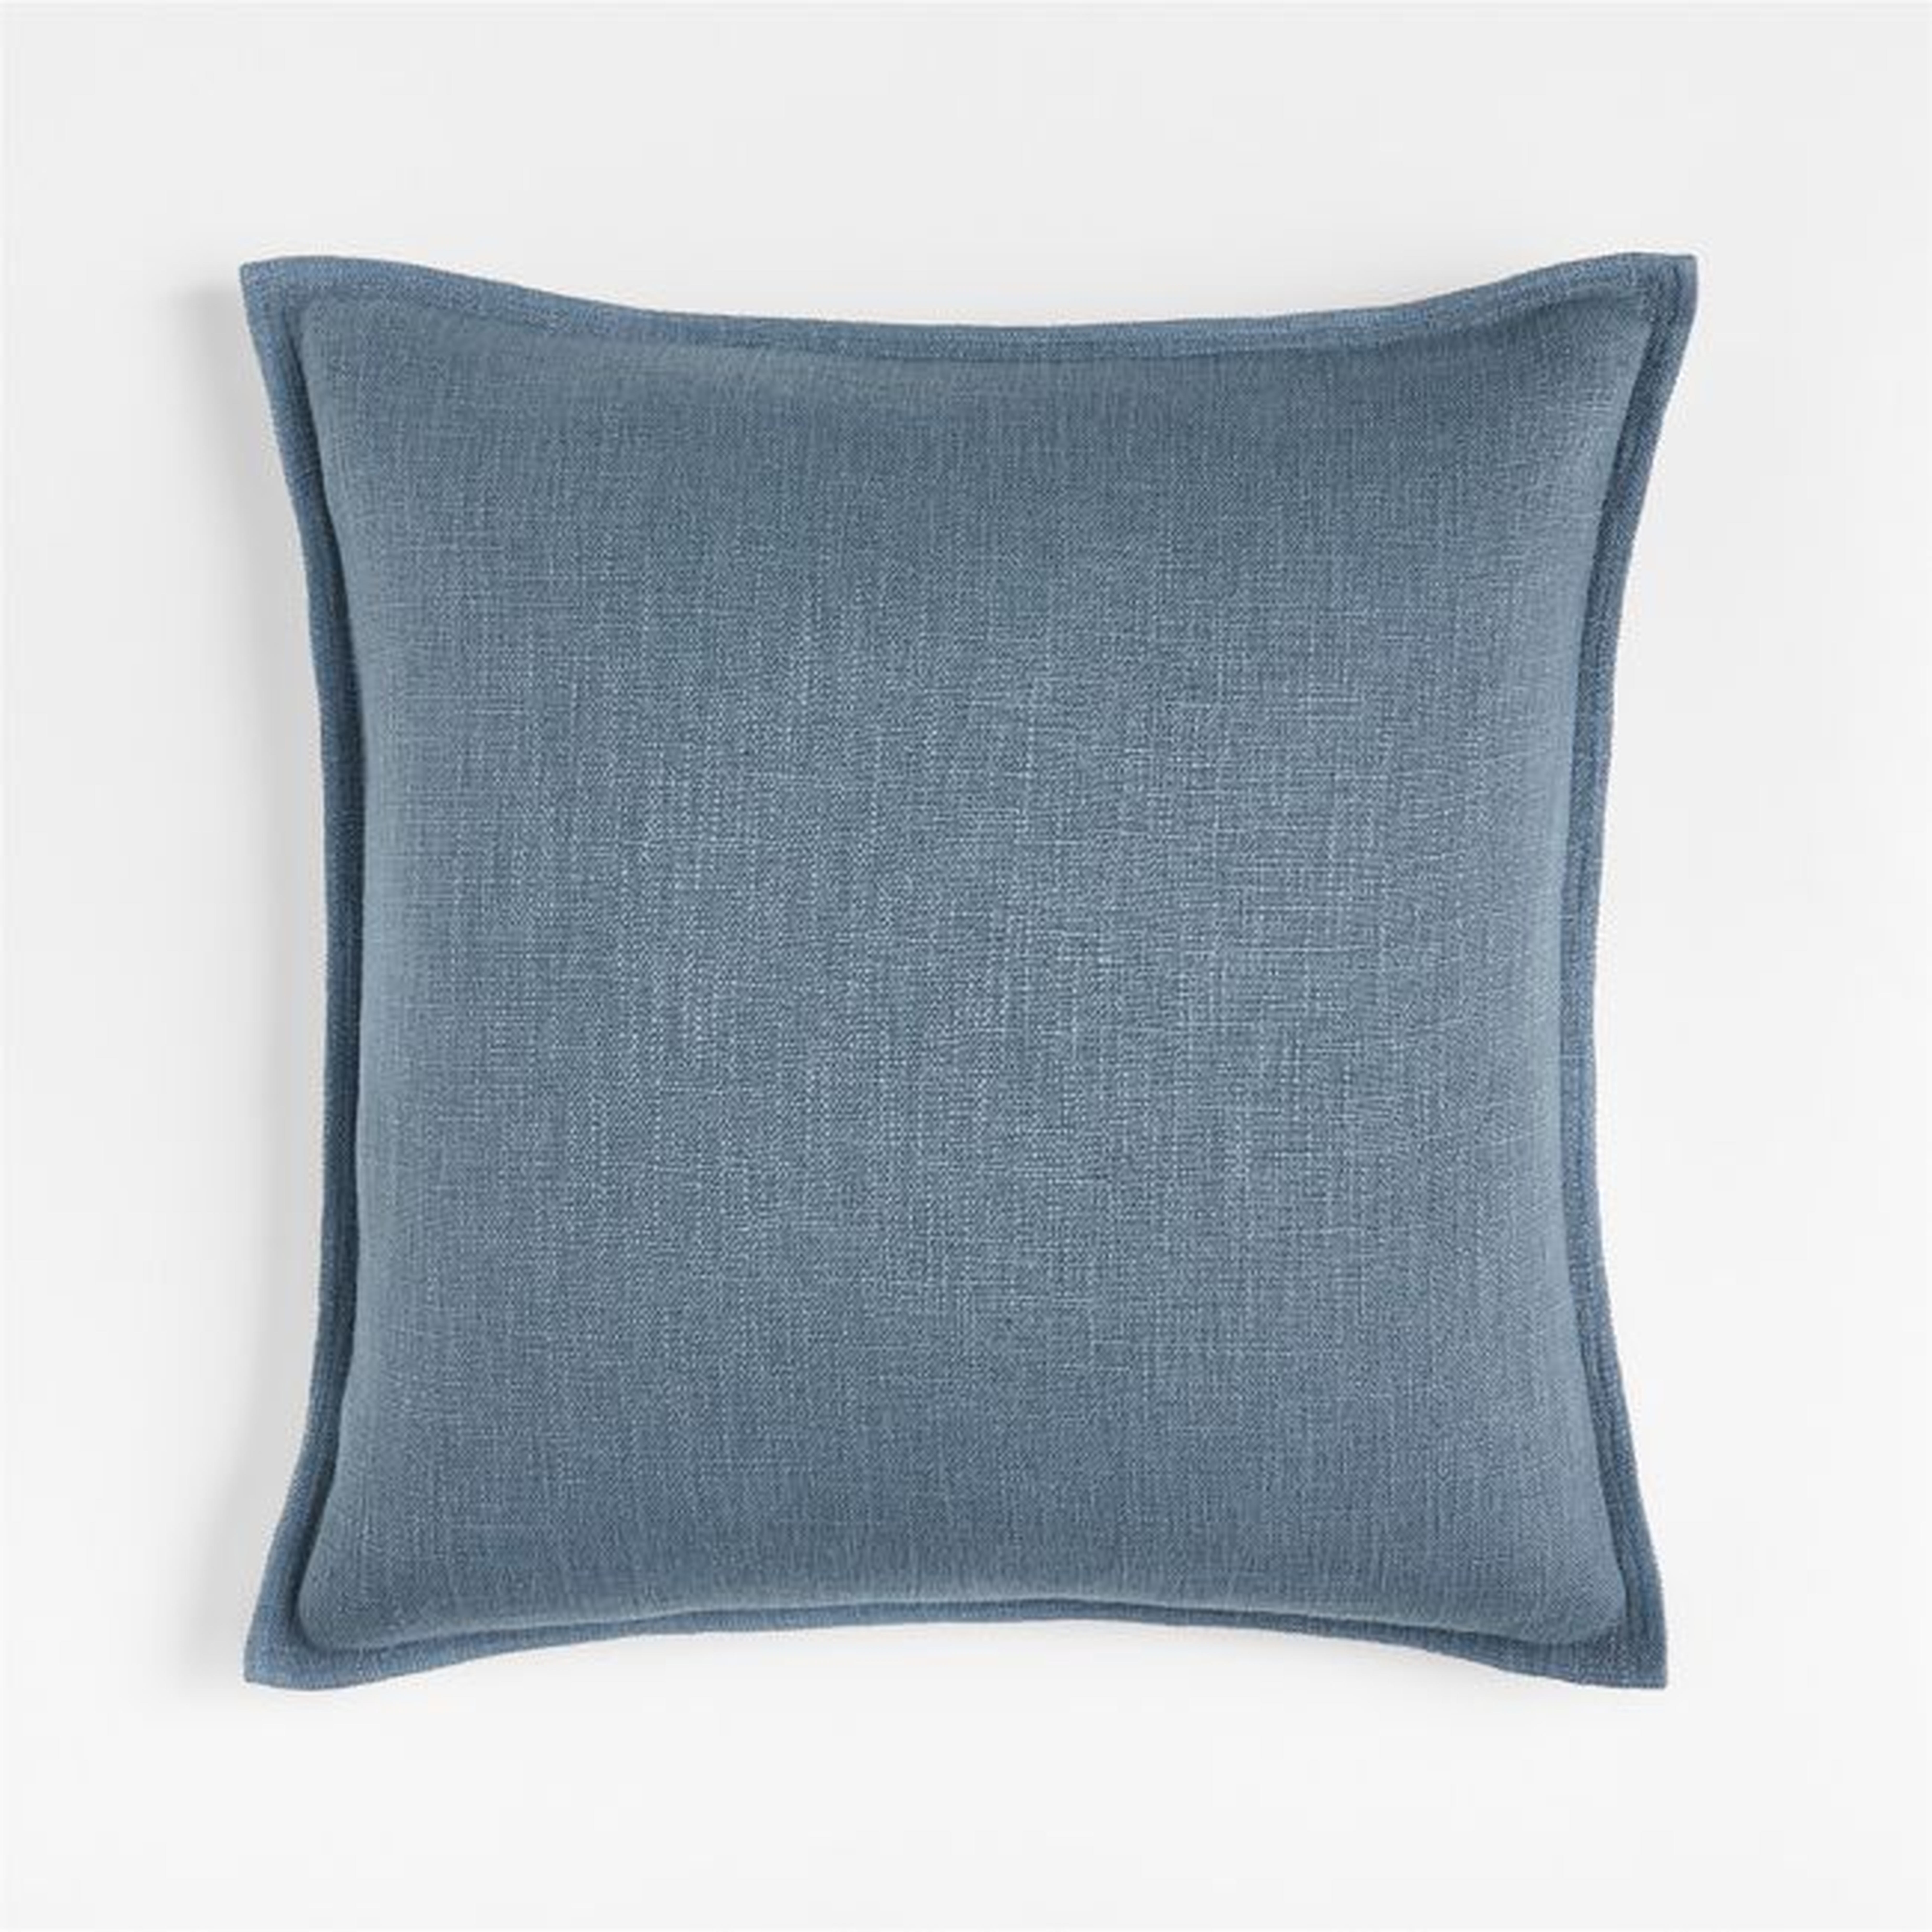 Blue 20" Laundered Linen Pillow with Down-Alternative Insert - Crate and Barrel